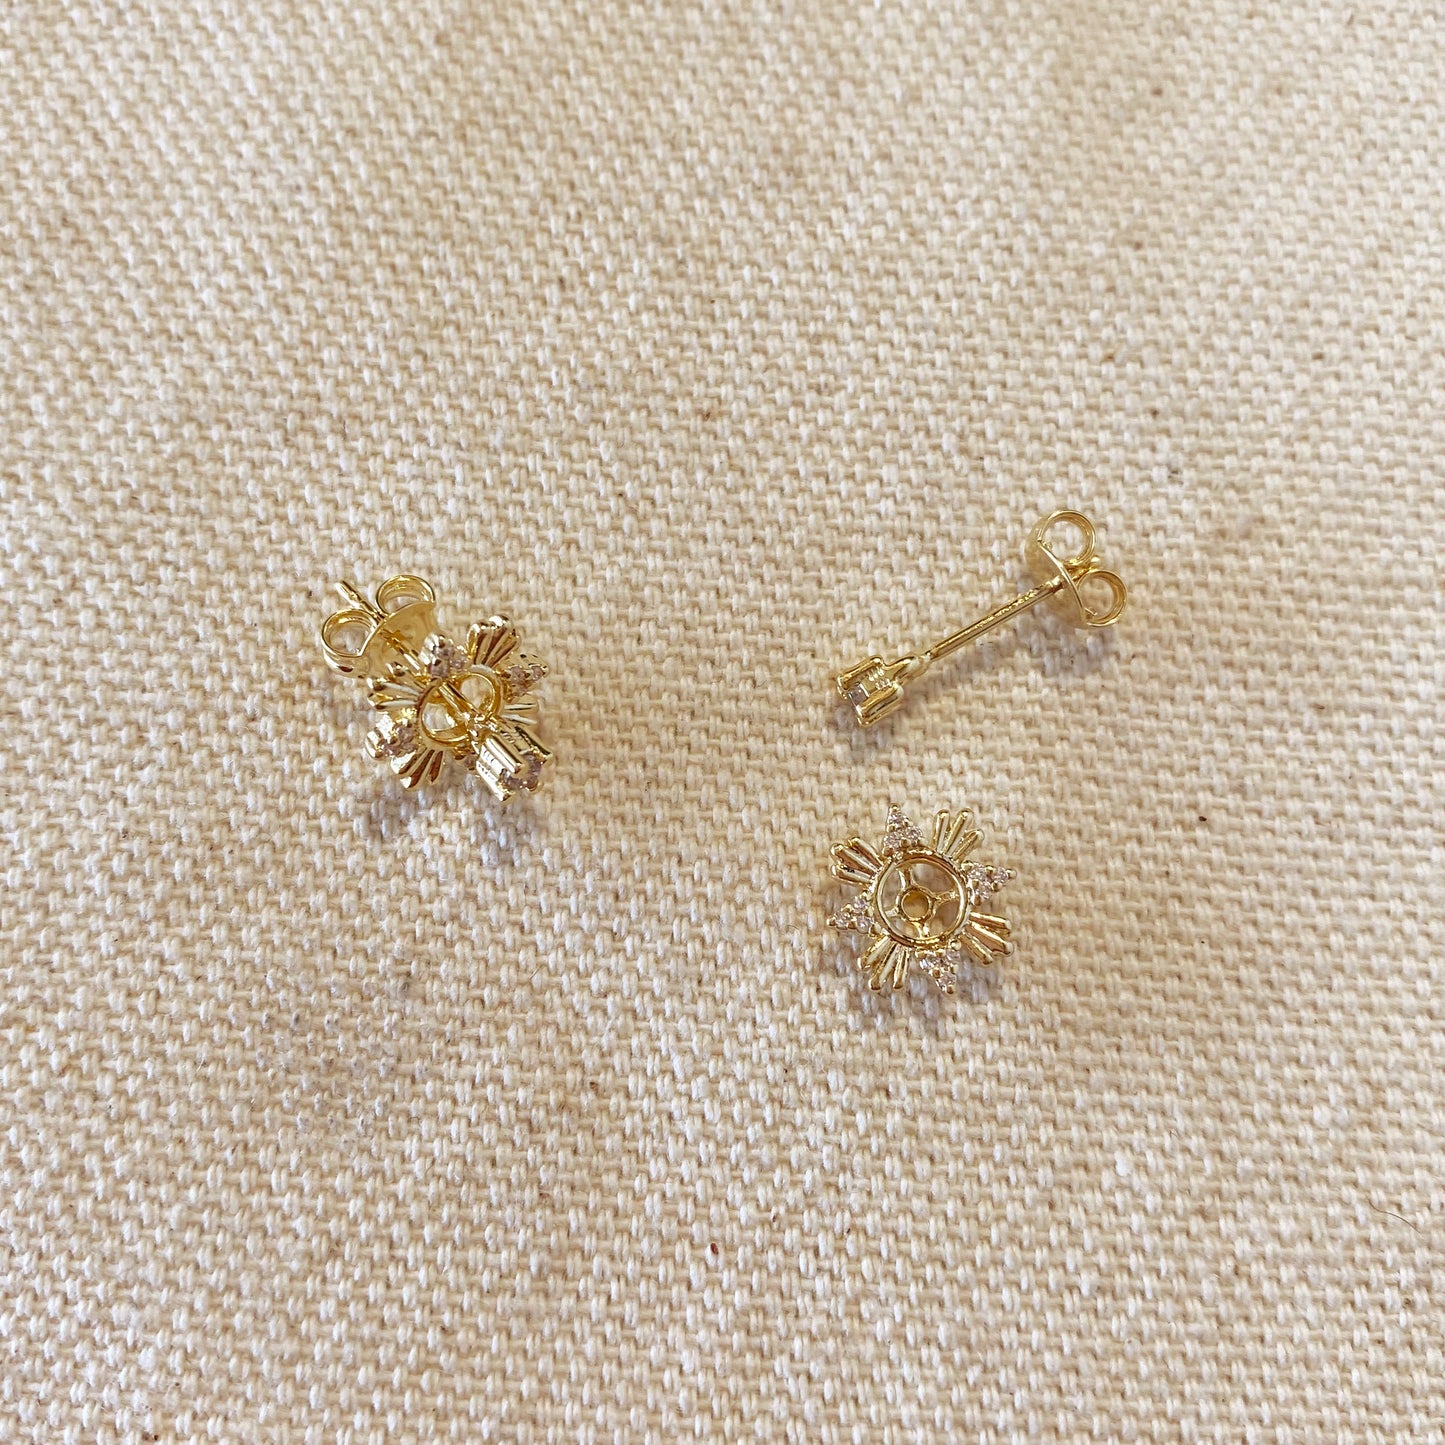 18k Gold Filled 2 Part Round Stud Earrings